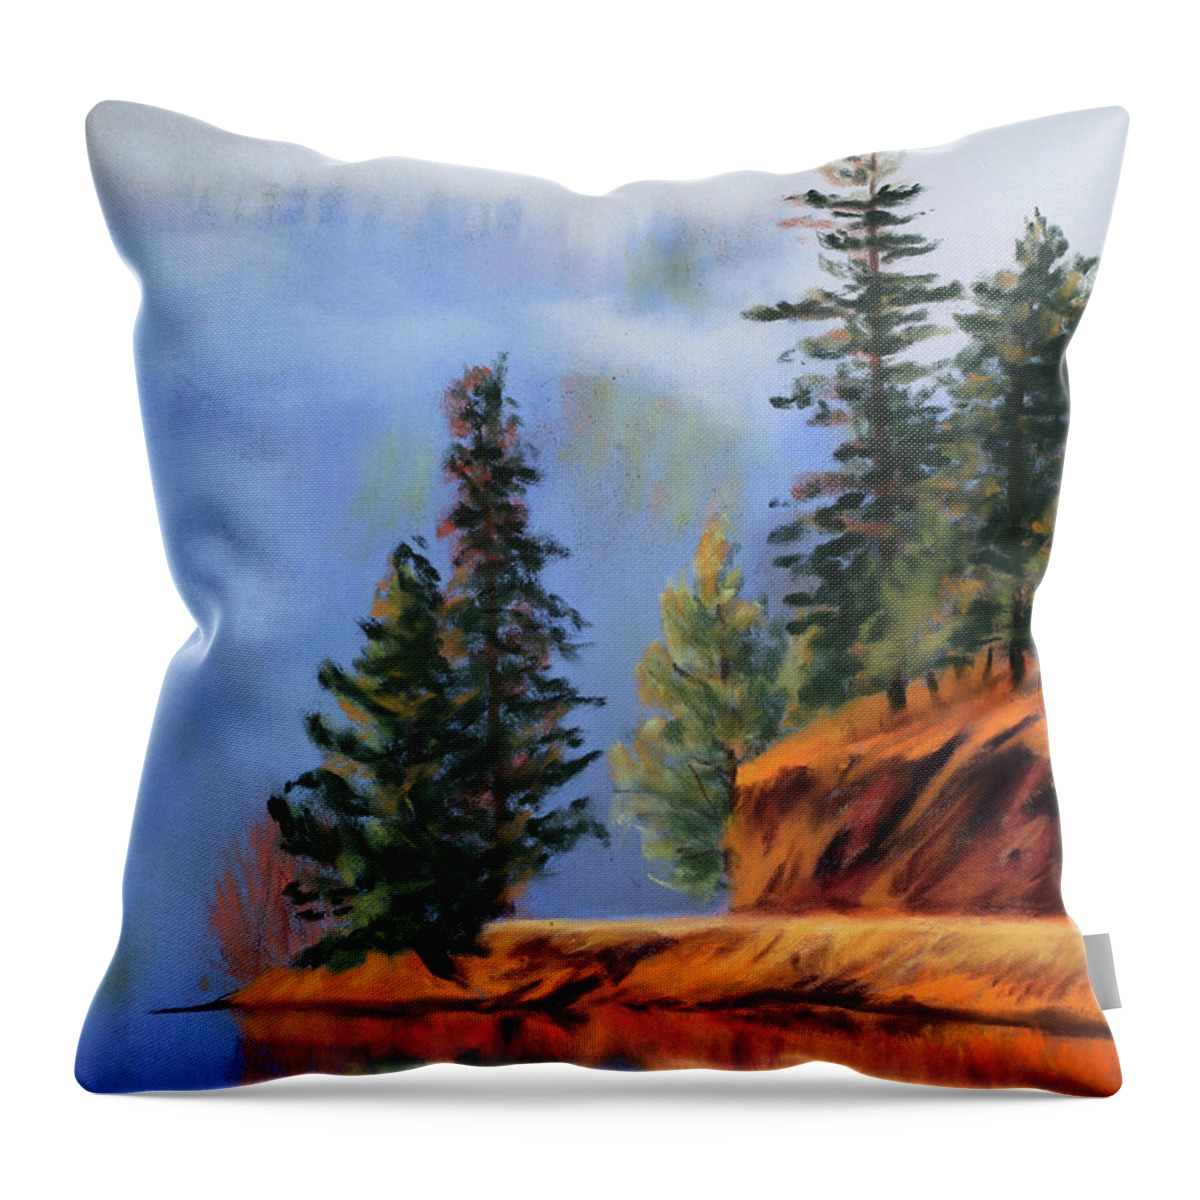 Water Throw Pillow featuring the painting Serenity by Sandi Snead